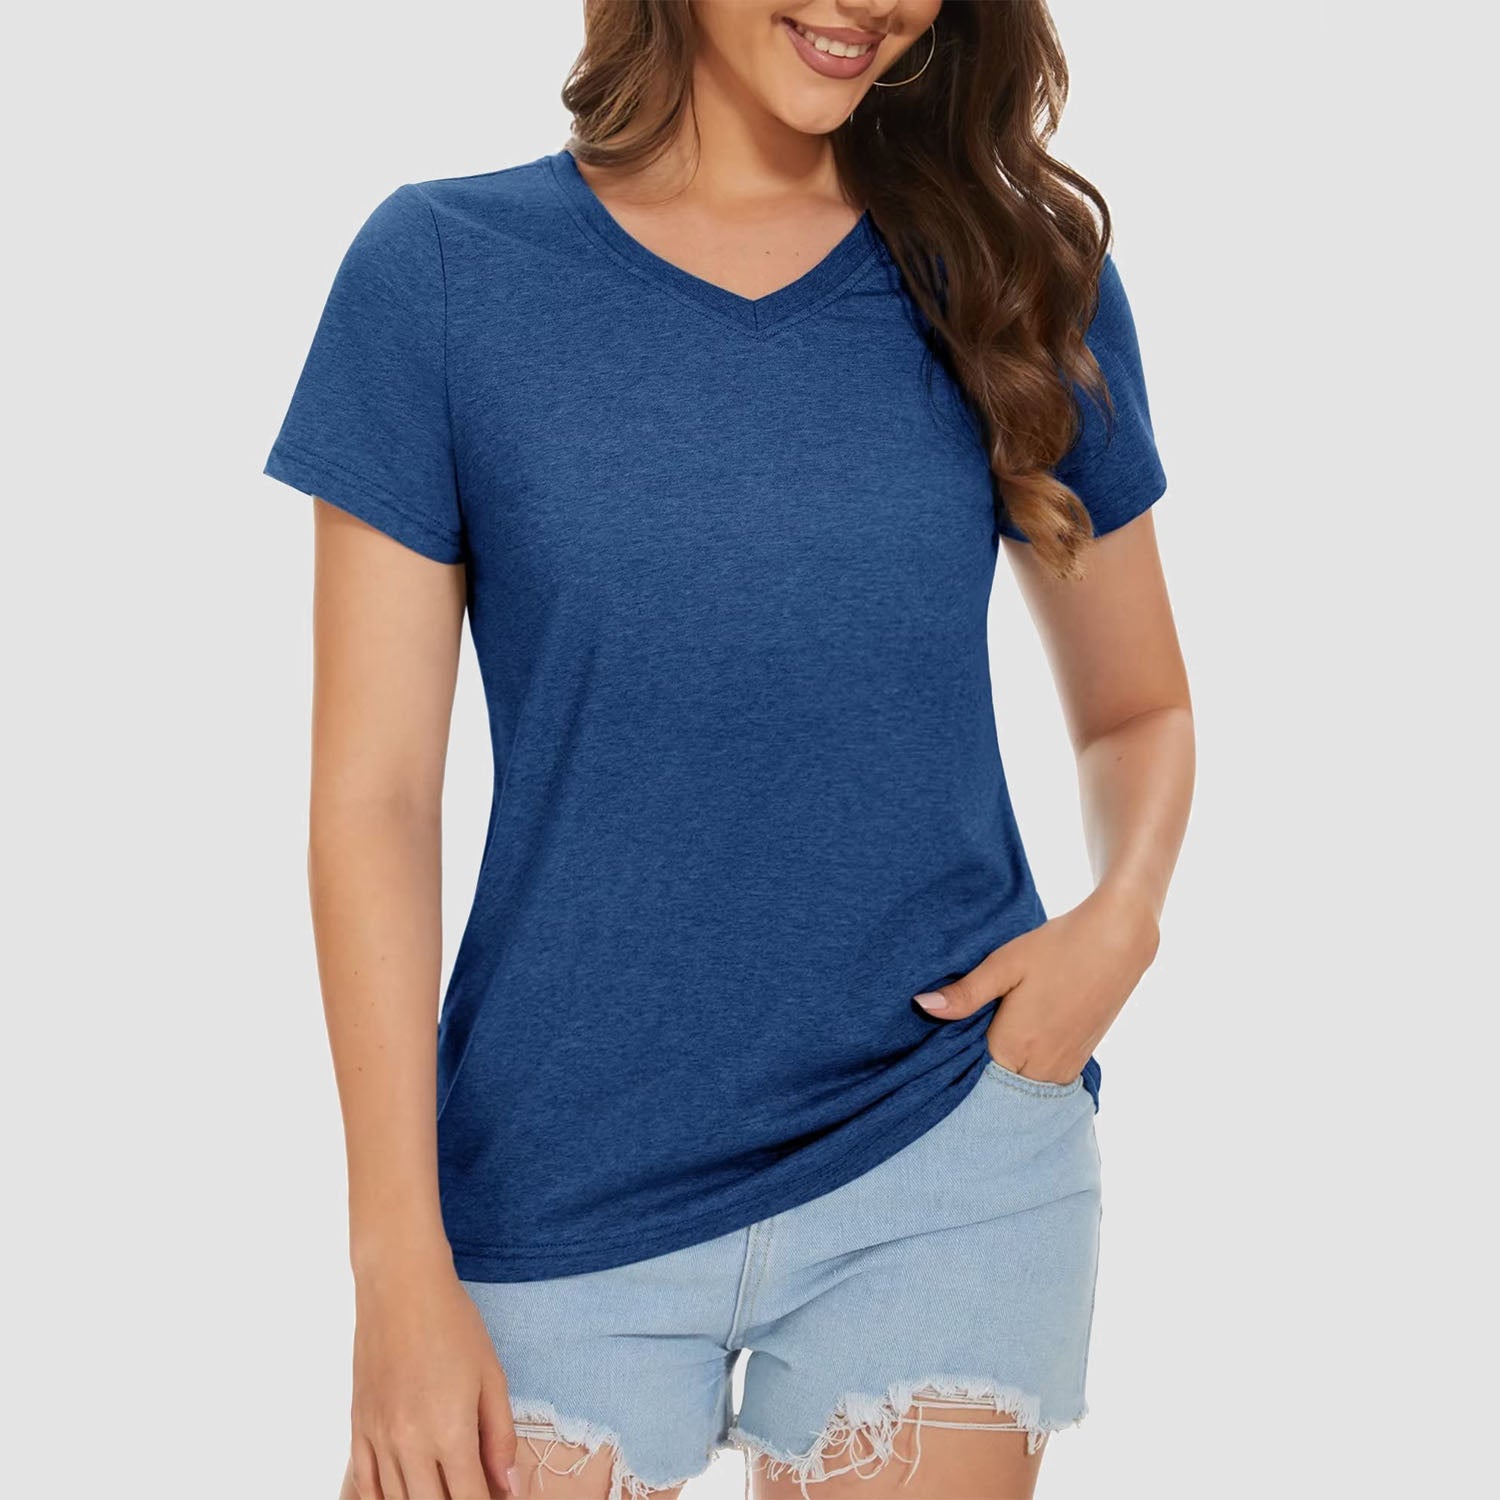 Womens V-Neck T-Shirt Short Sleeve Moisture Wicking Athletic Tee Workout Activewear Cotton Basic Top